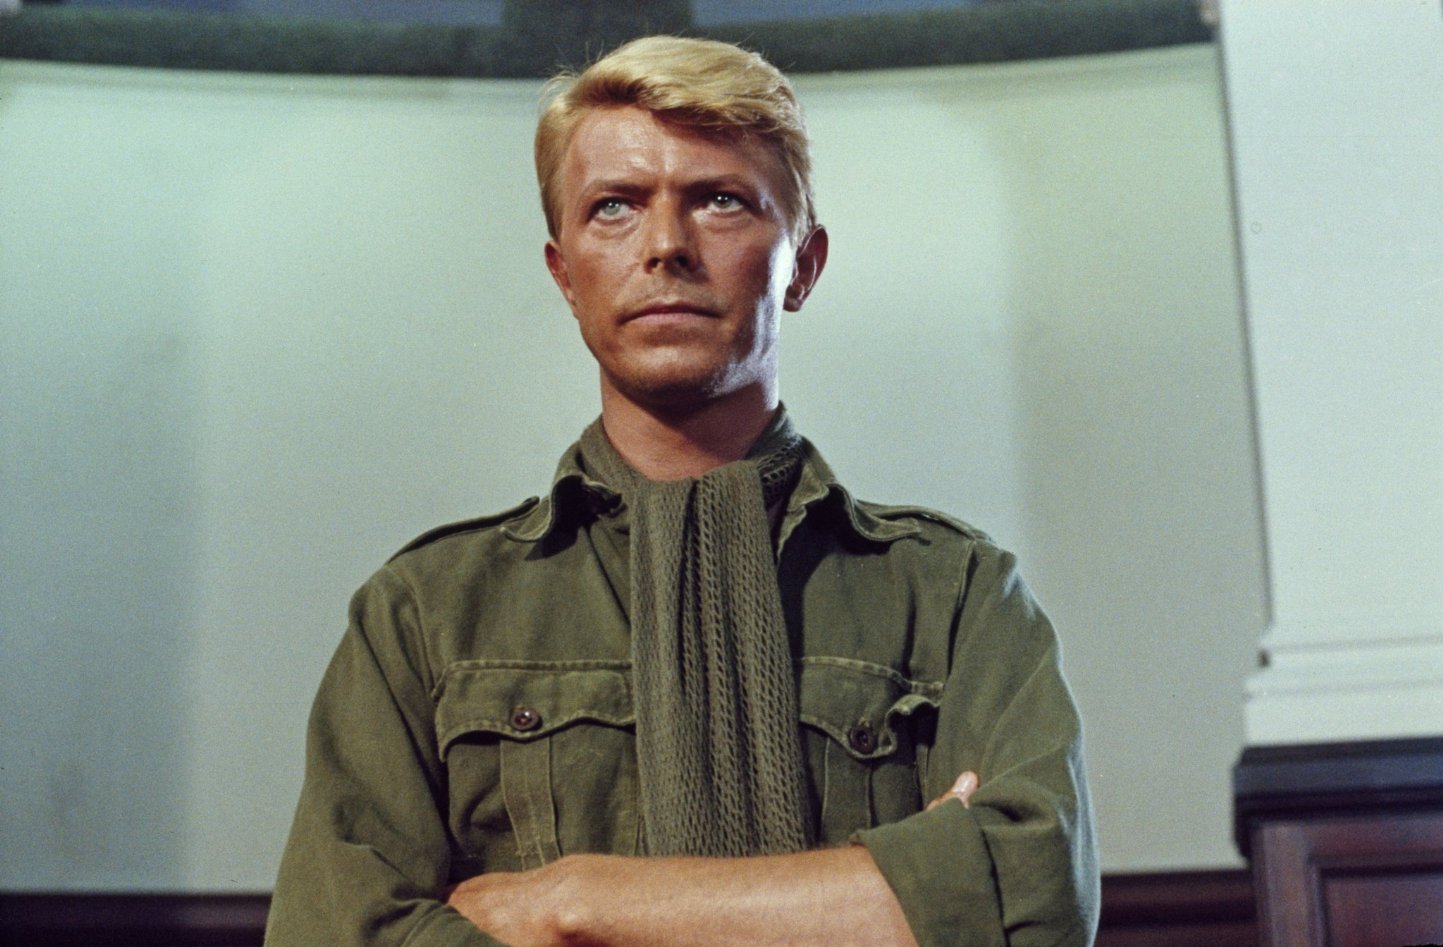 David Bowie in "Merry Christmas, Mr. Lawrence" (1983)